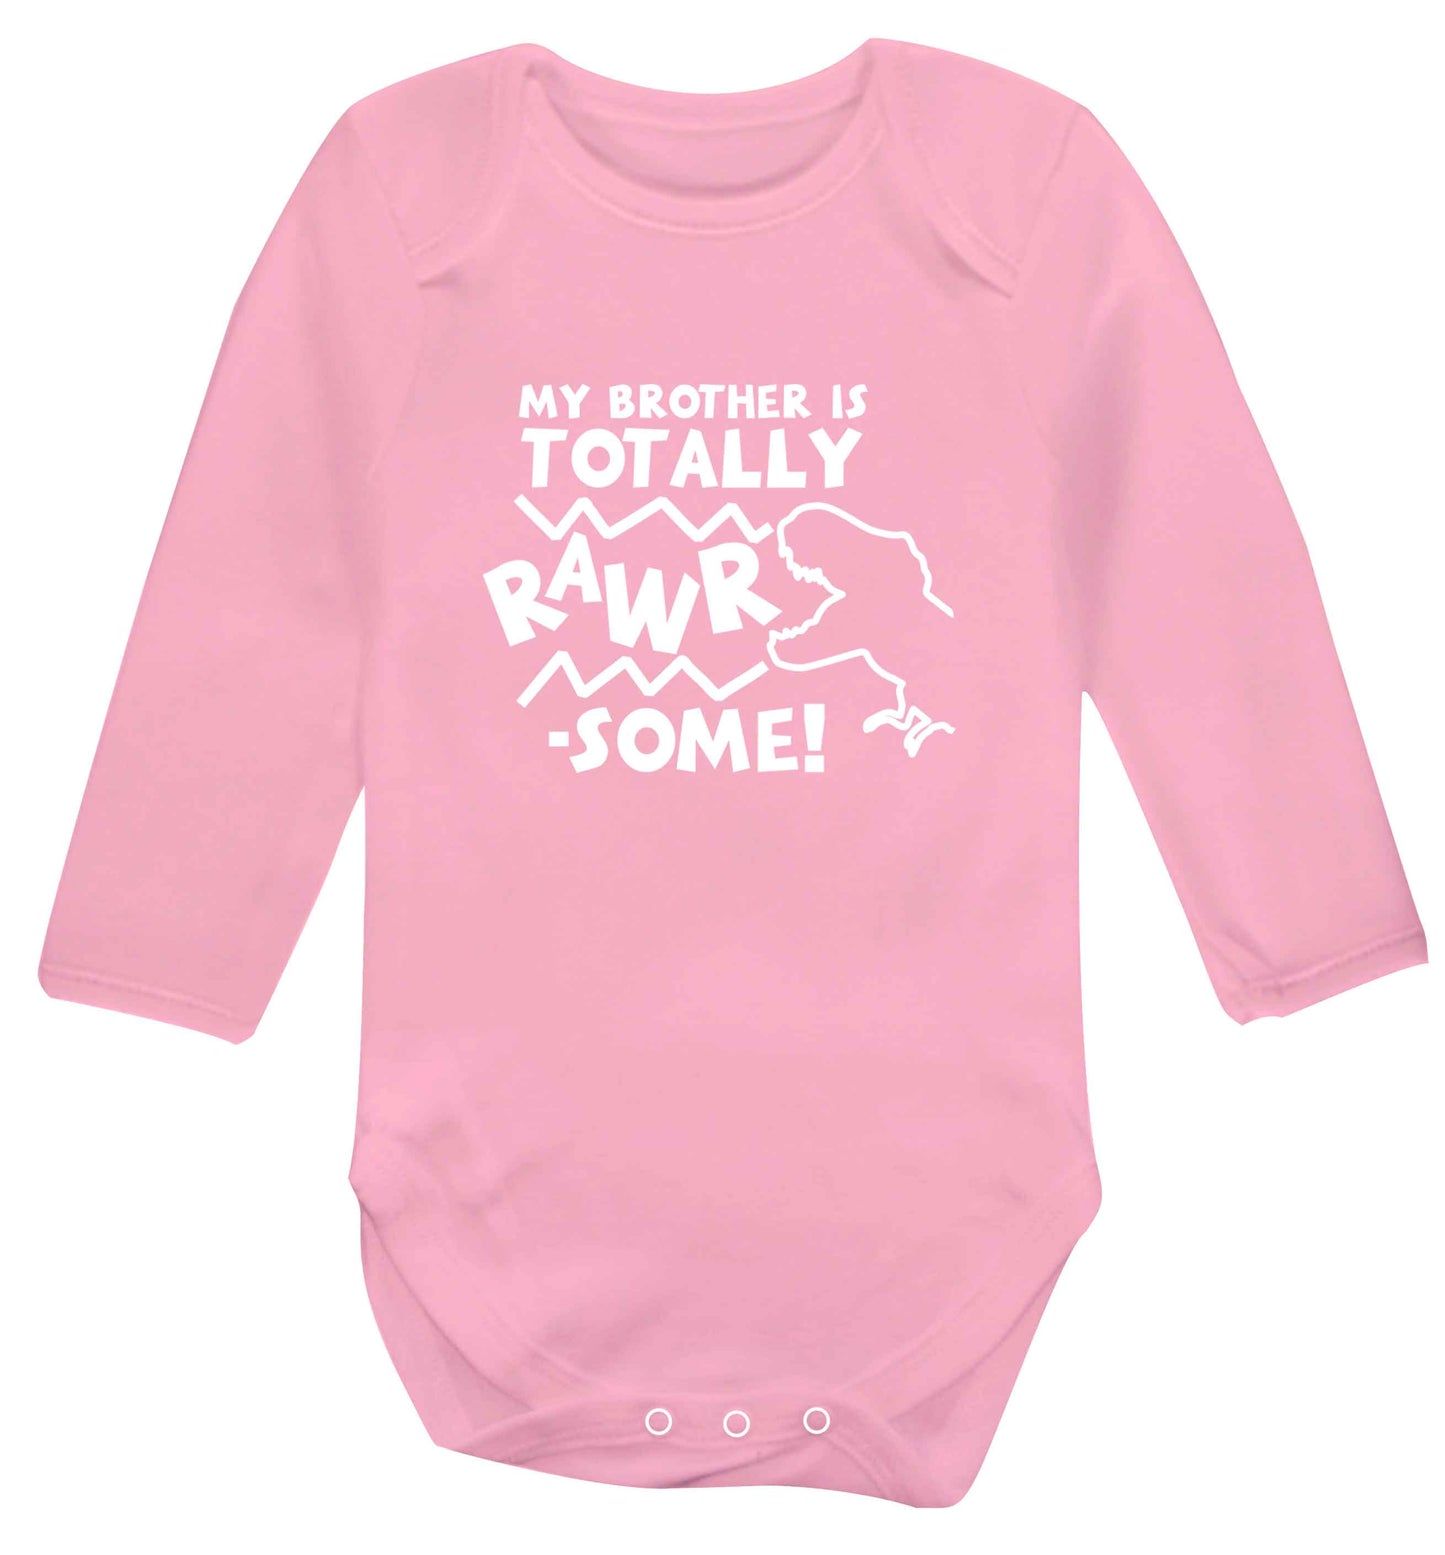 My brother is totally rawrsome baby vest long sleeved pale pink 6-12 months